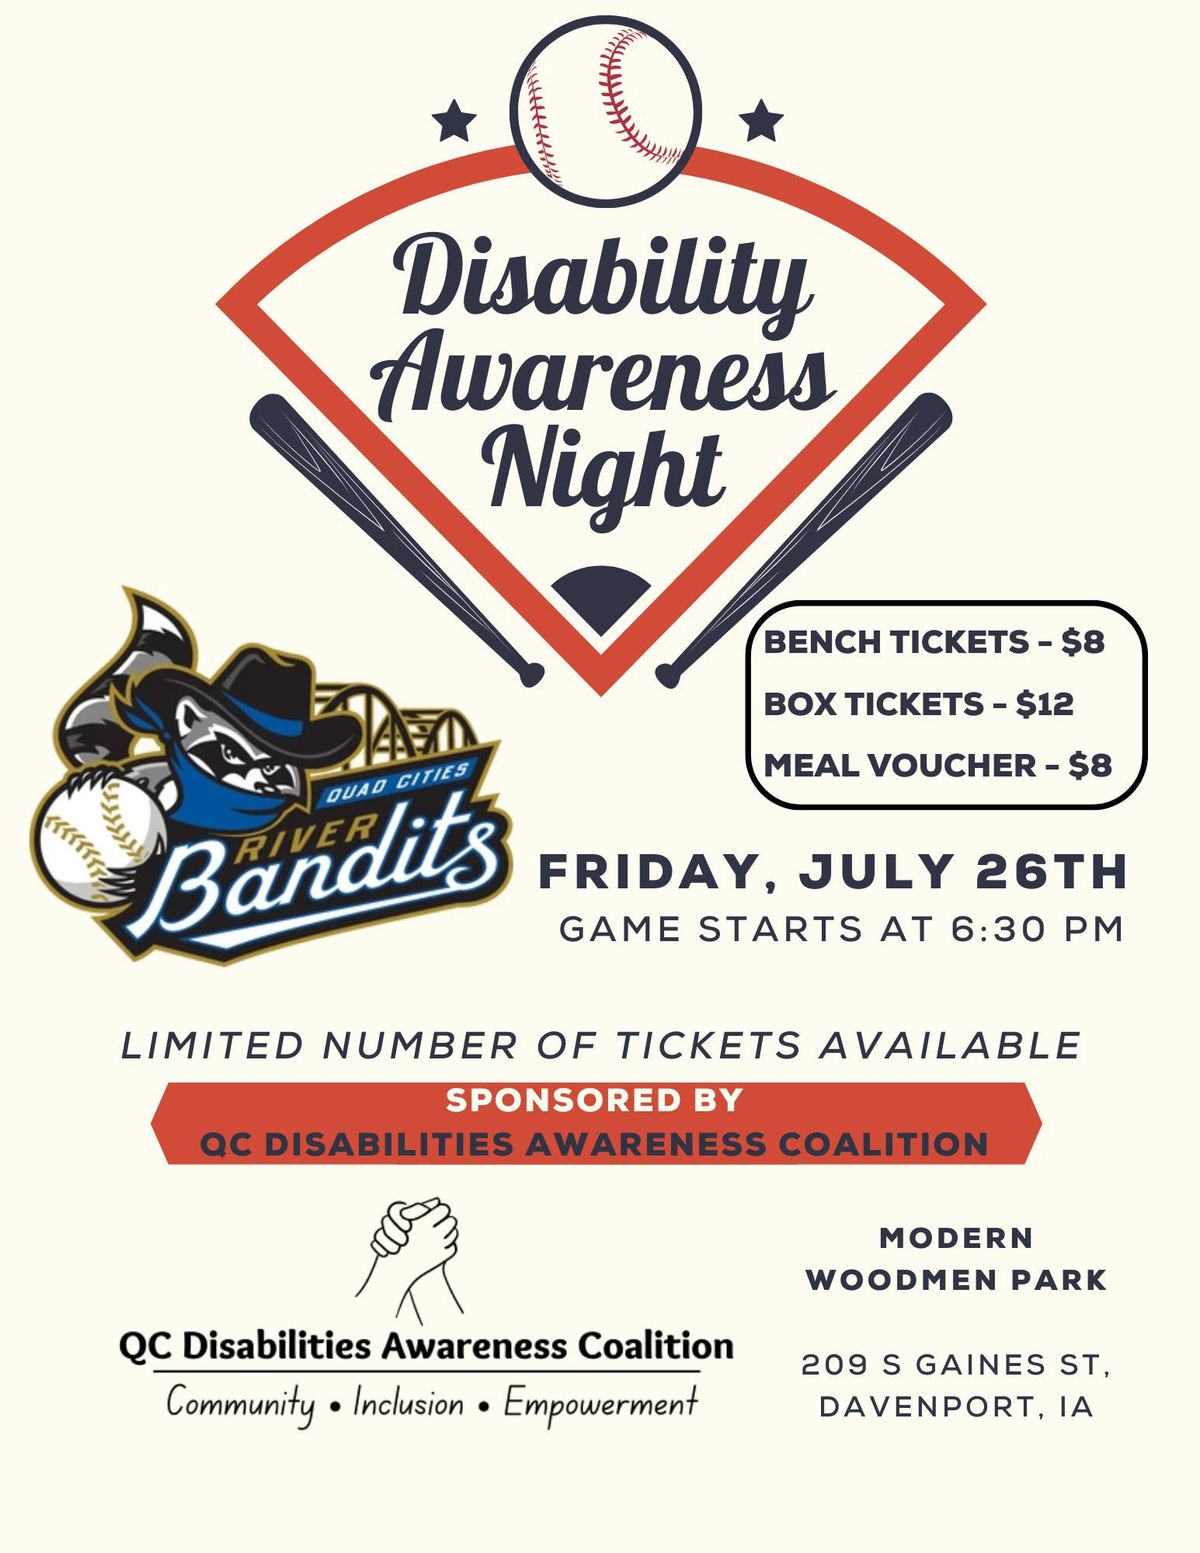 Disability Awareness Night with the River Bandits